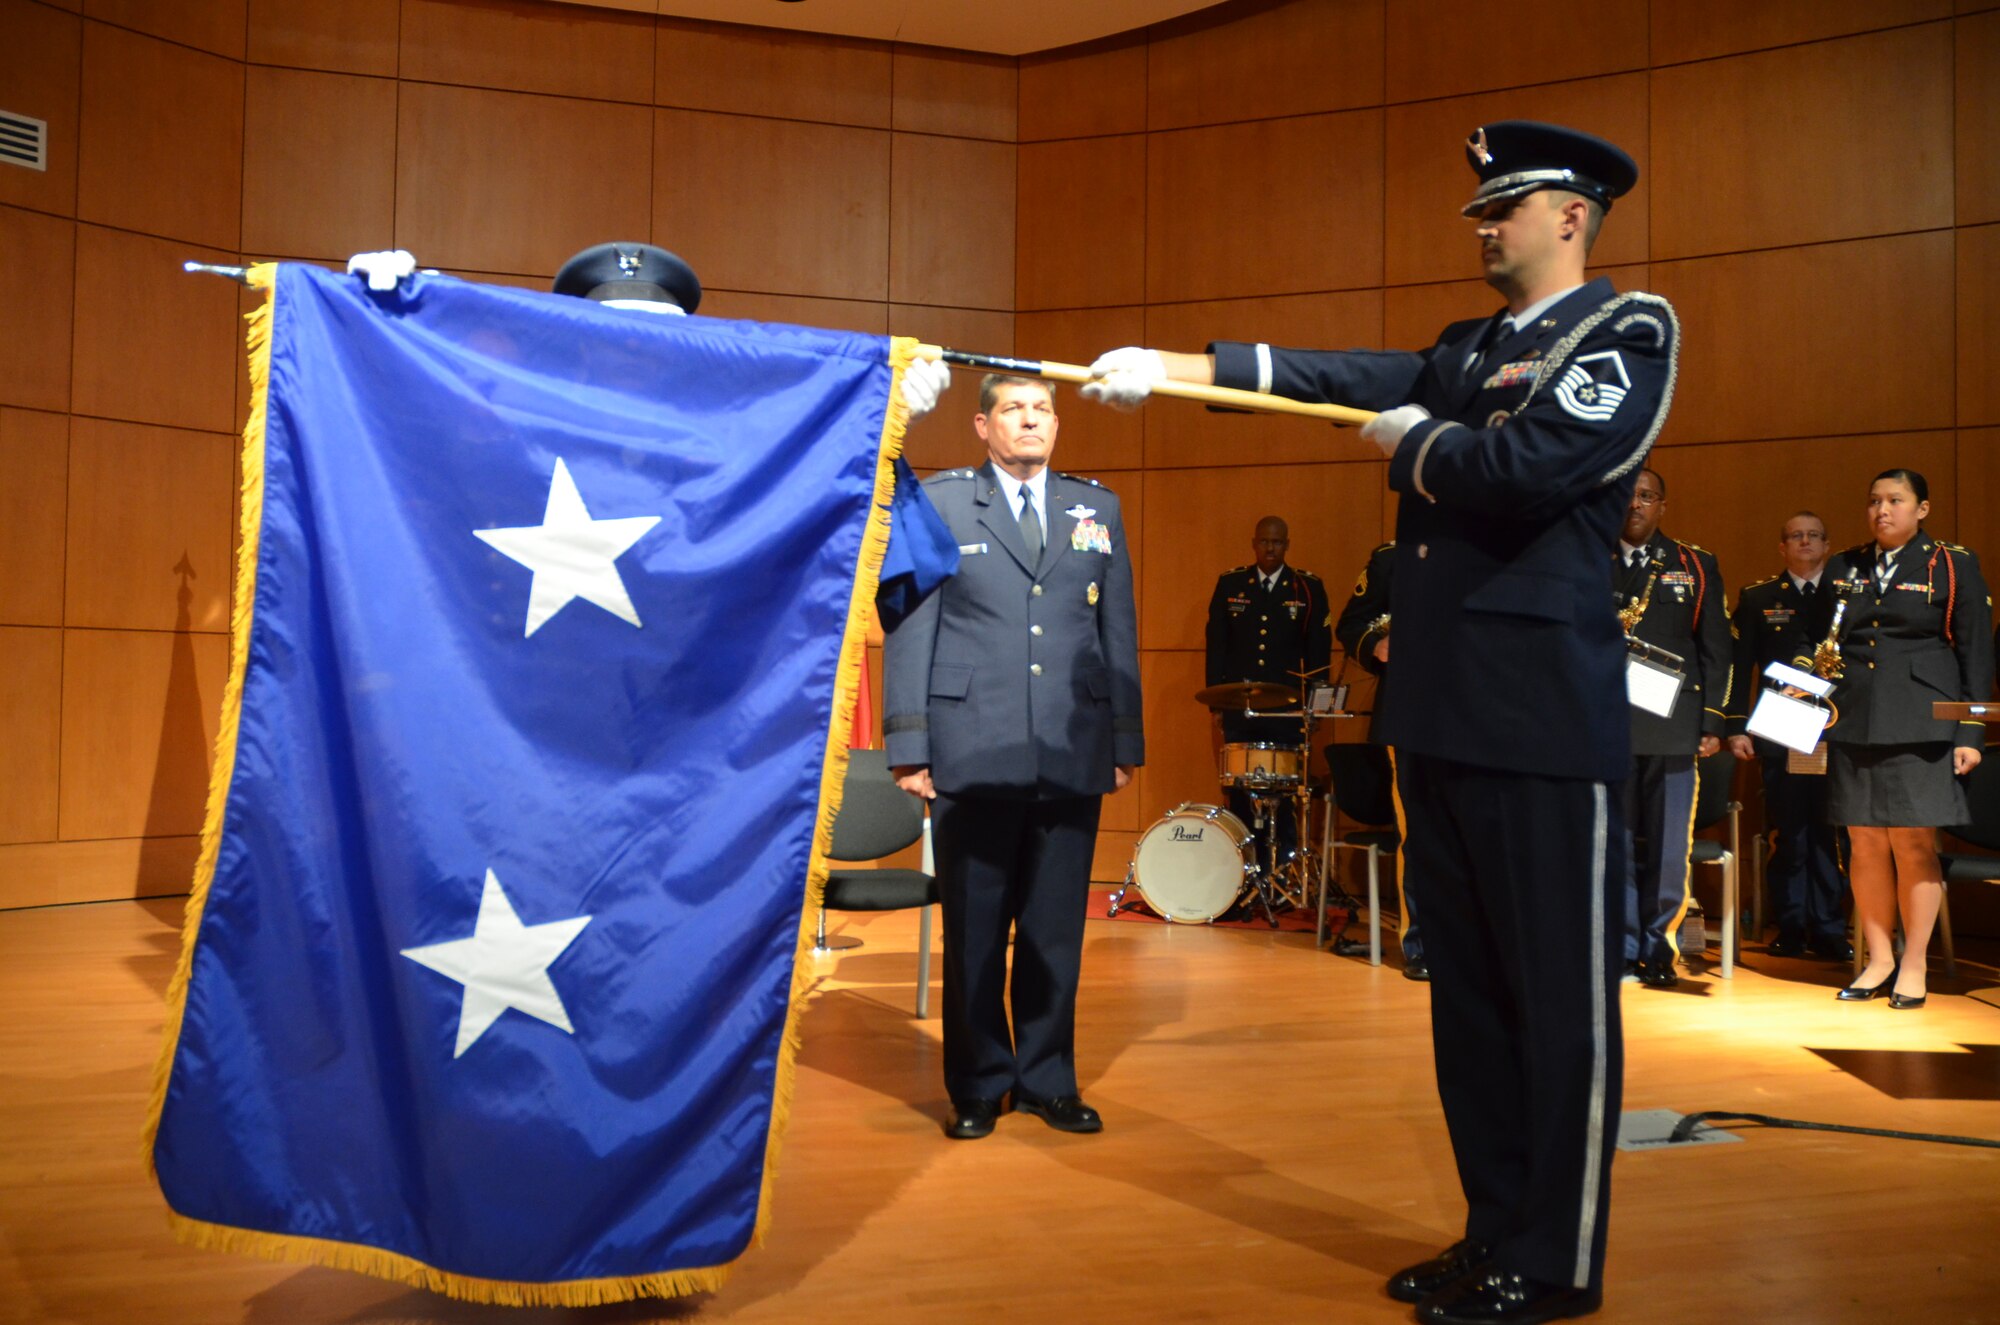 Air Force Color Guard unfurled the two star general officer flag for newly promoted General Officer David Todd Kelly at North Carolina National Guard Joint Force Headquarters on March 7, 2014.  Kelly was promoted to the rank of Air Force Maj. Gen. and will serve as the Air National Guard Assistant to the Commander, Air Mobility Command at Scott Air Force Base, IL.  In this capacity, he will be responsible for advising the commander and staff on all issues impacting the ANG nationally. (U.S. Army National Guard Photo by Sgt Leticia Samuels, North Carolina National Guard Public Affairs/Released)